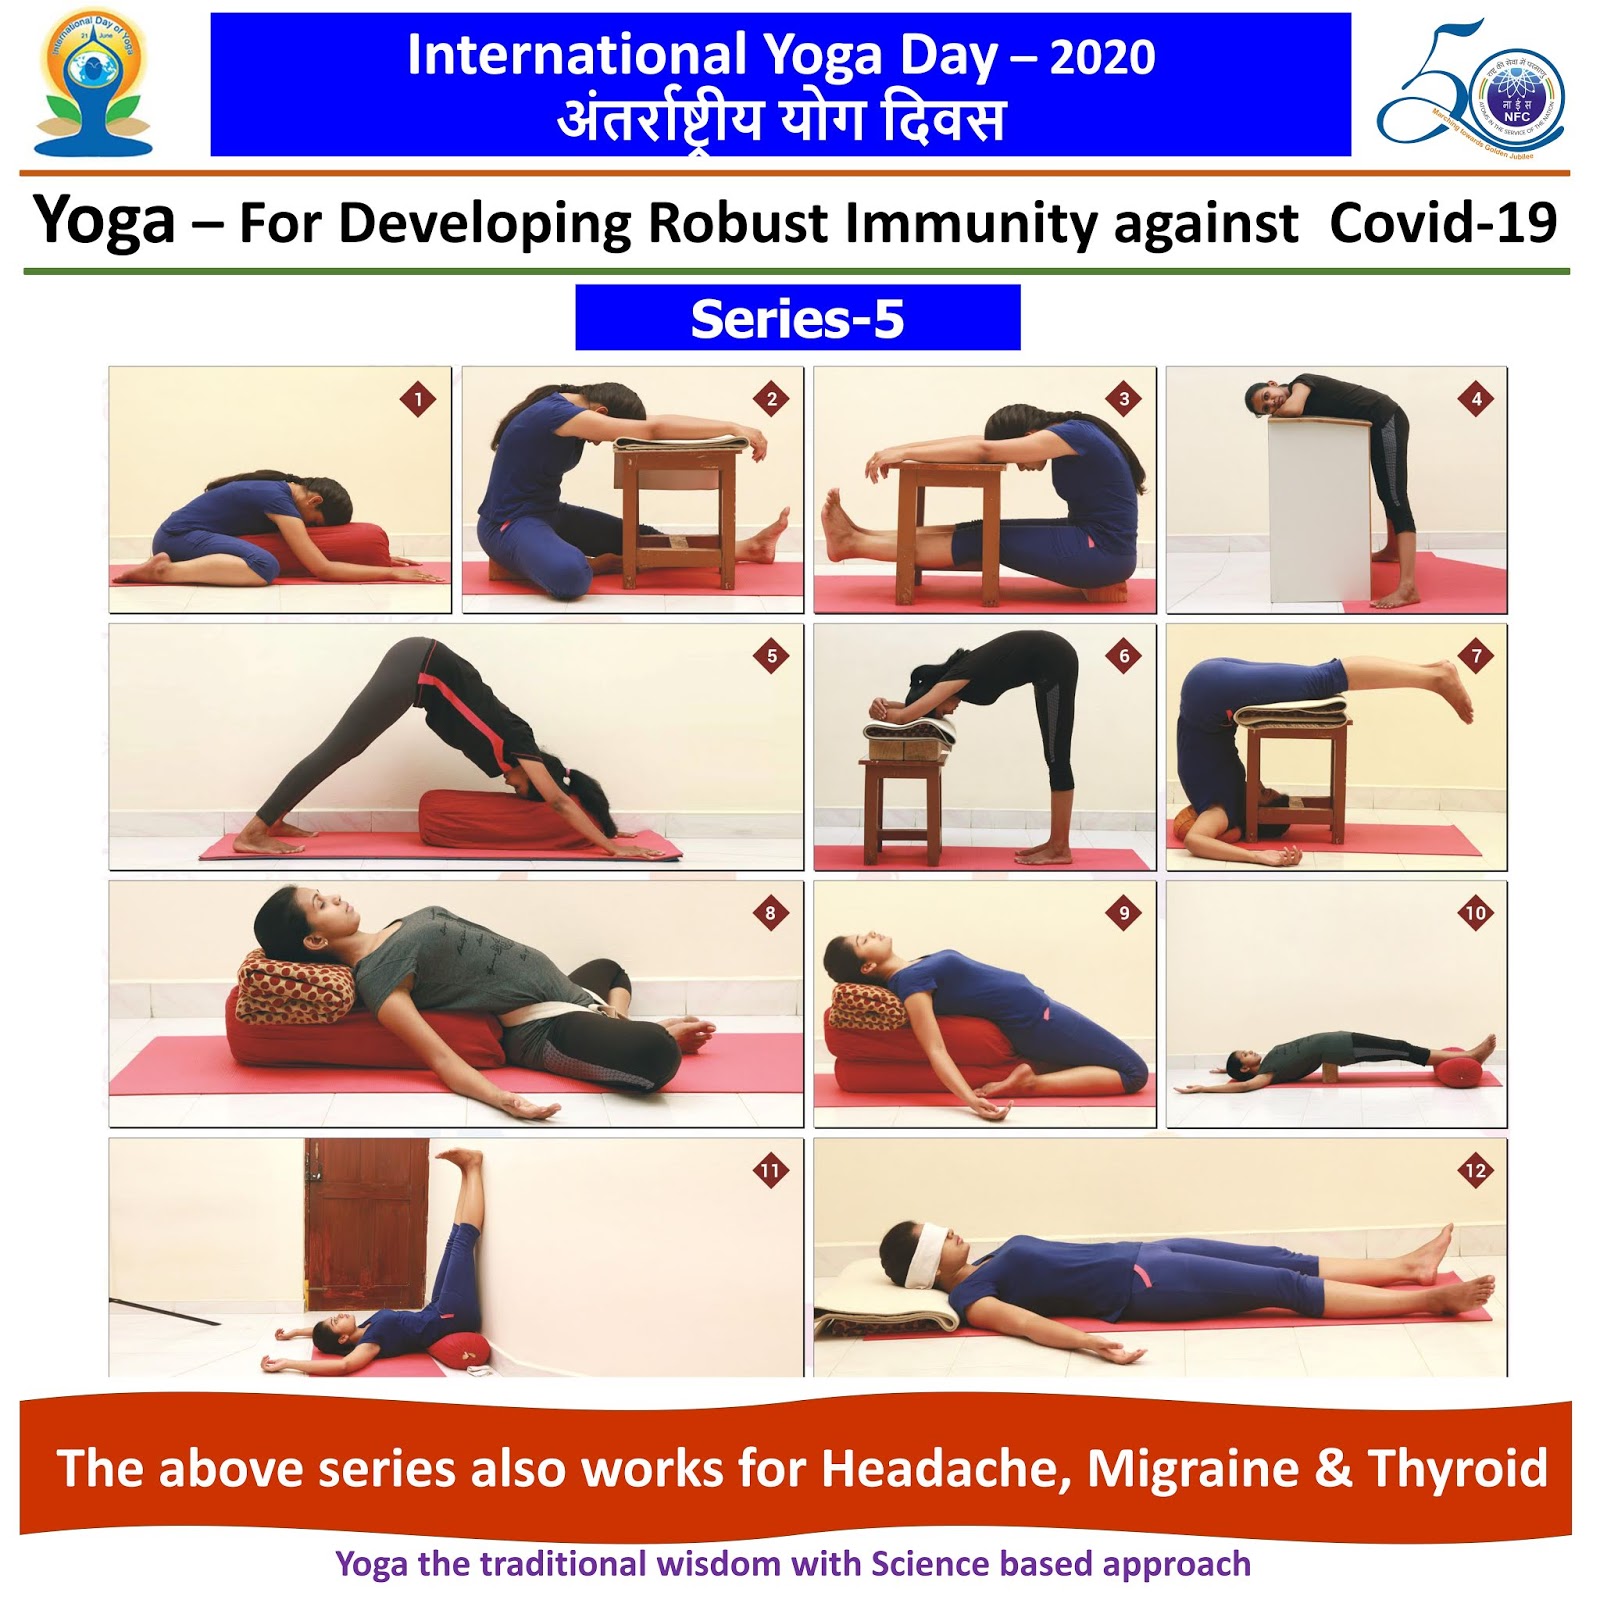 Happy International Yoga Day ... This series also works for Headache, Migraine & Thyroid